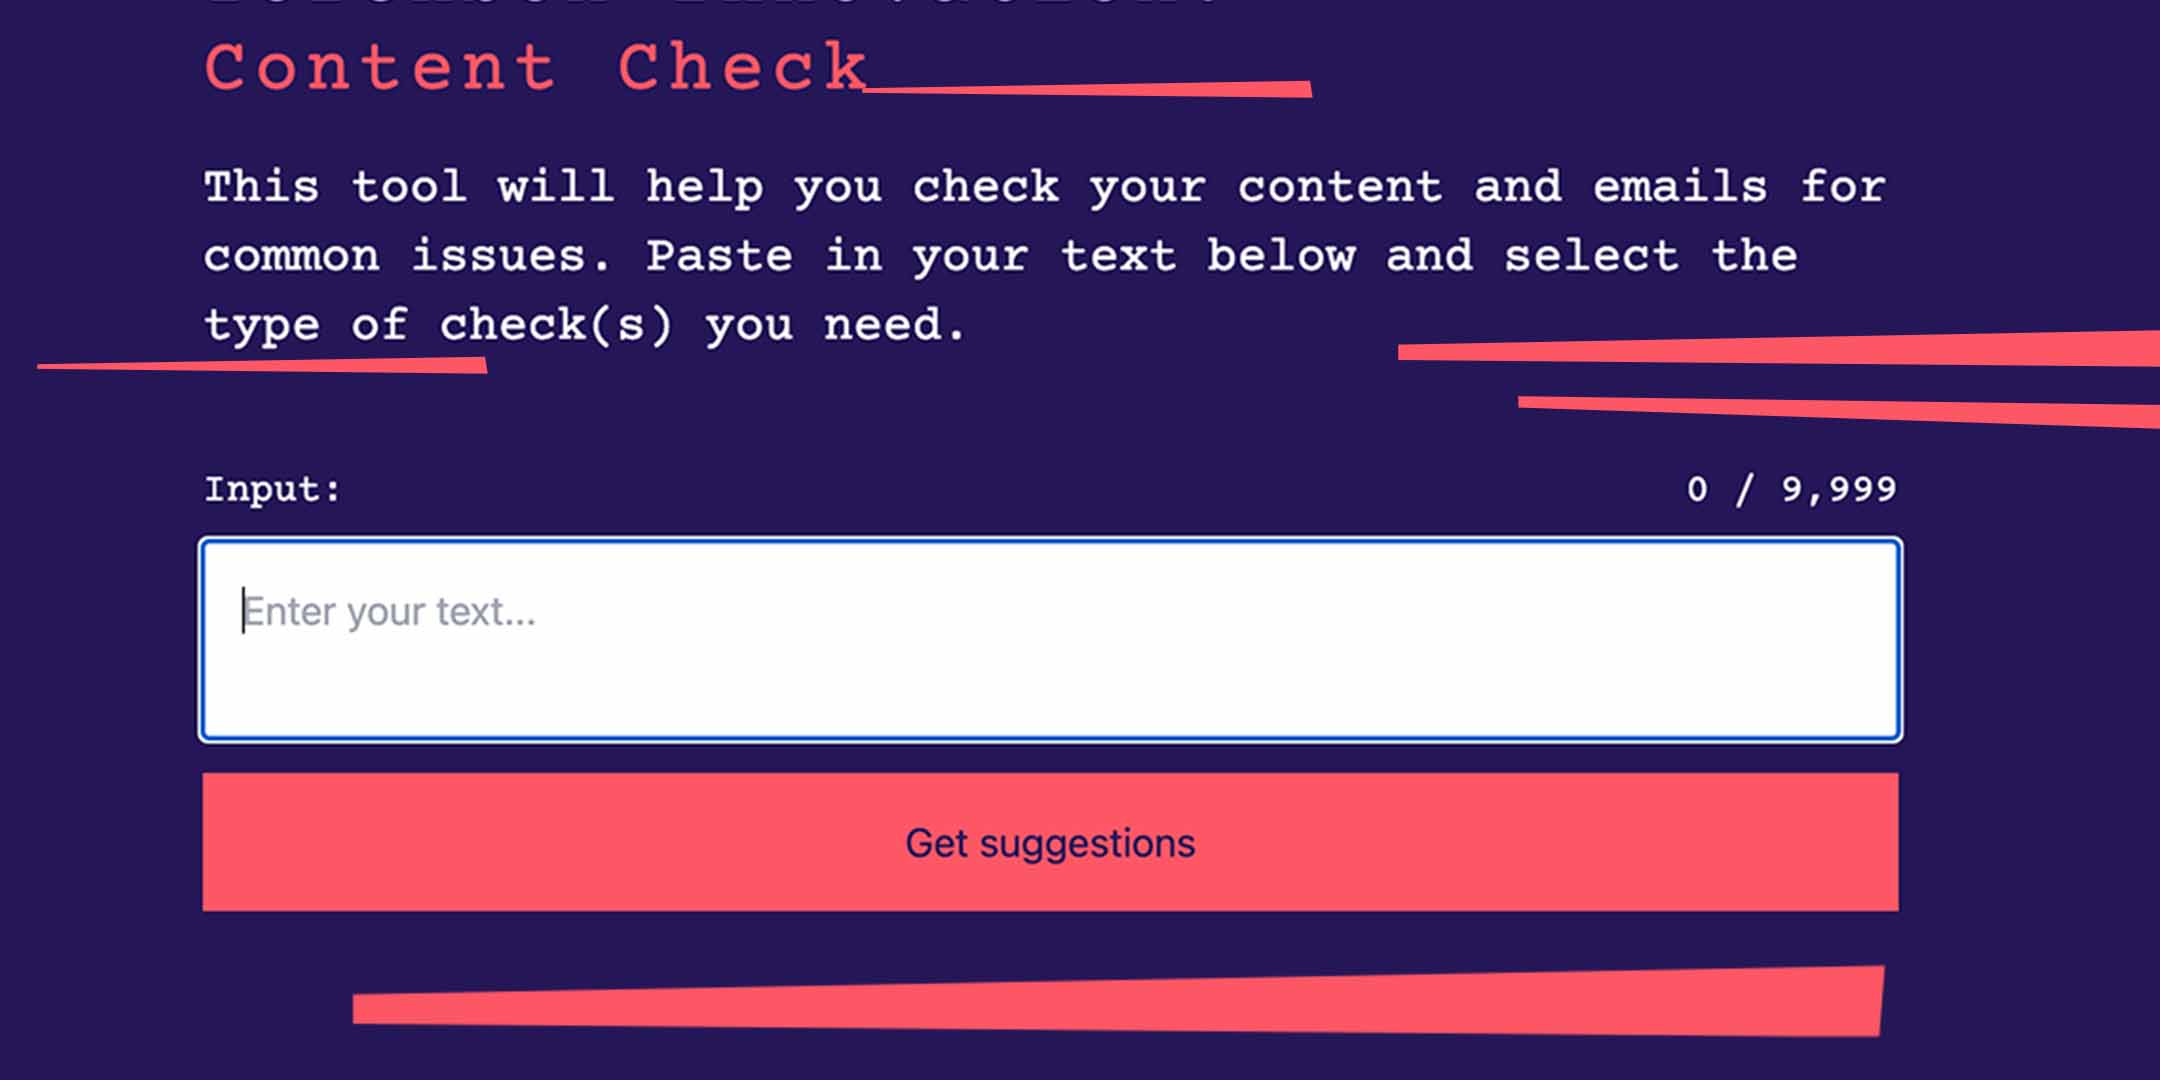 An image showing the Content Check UI